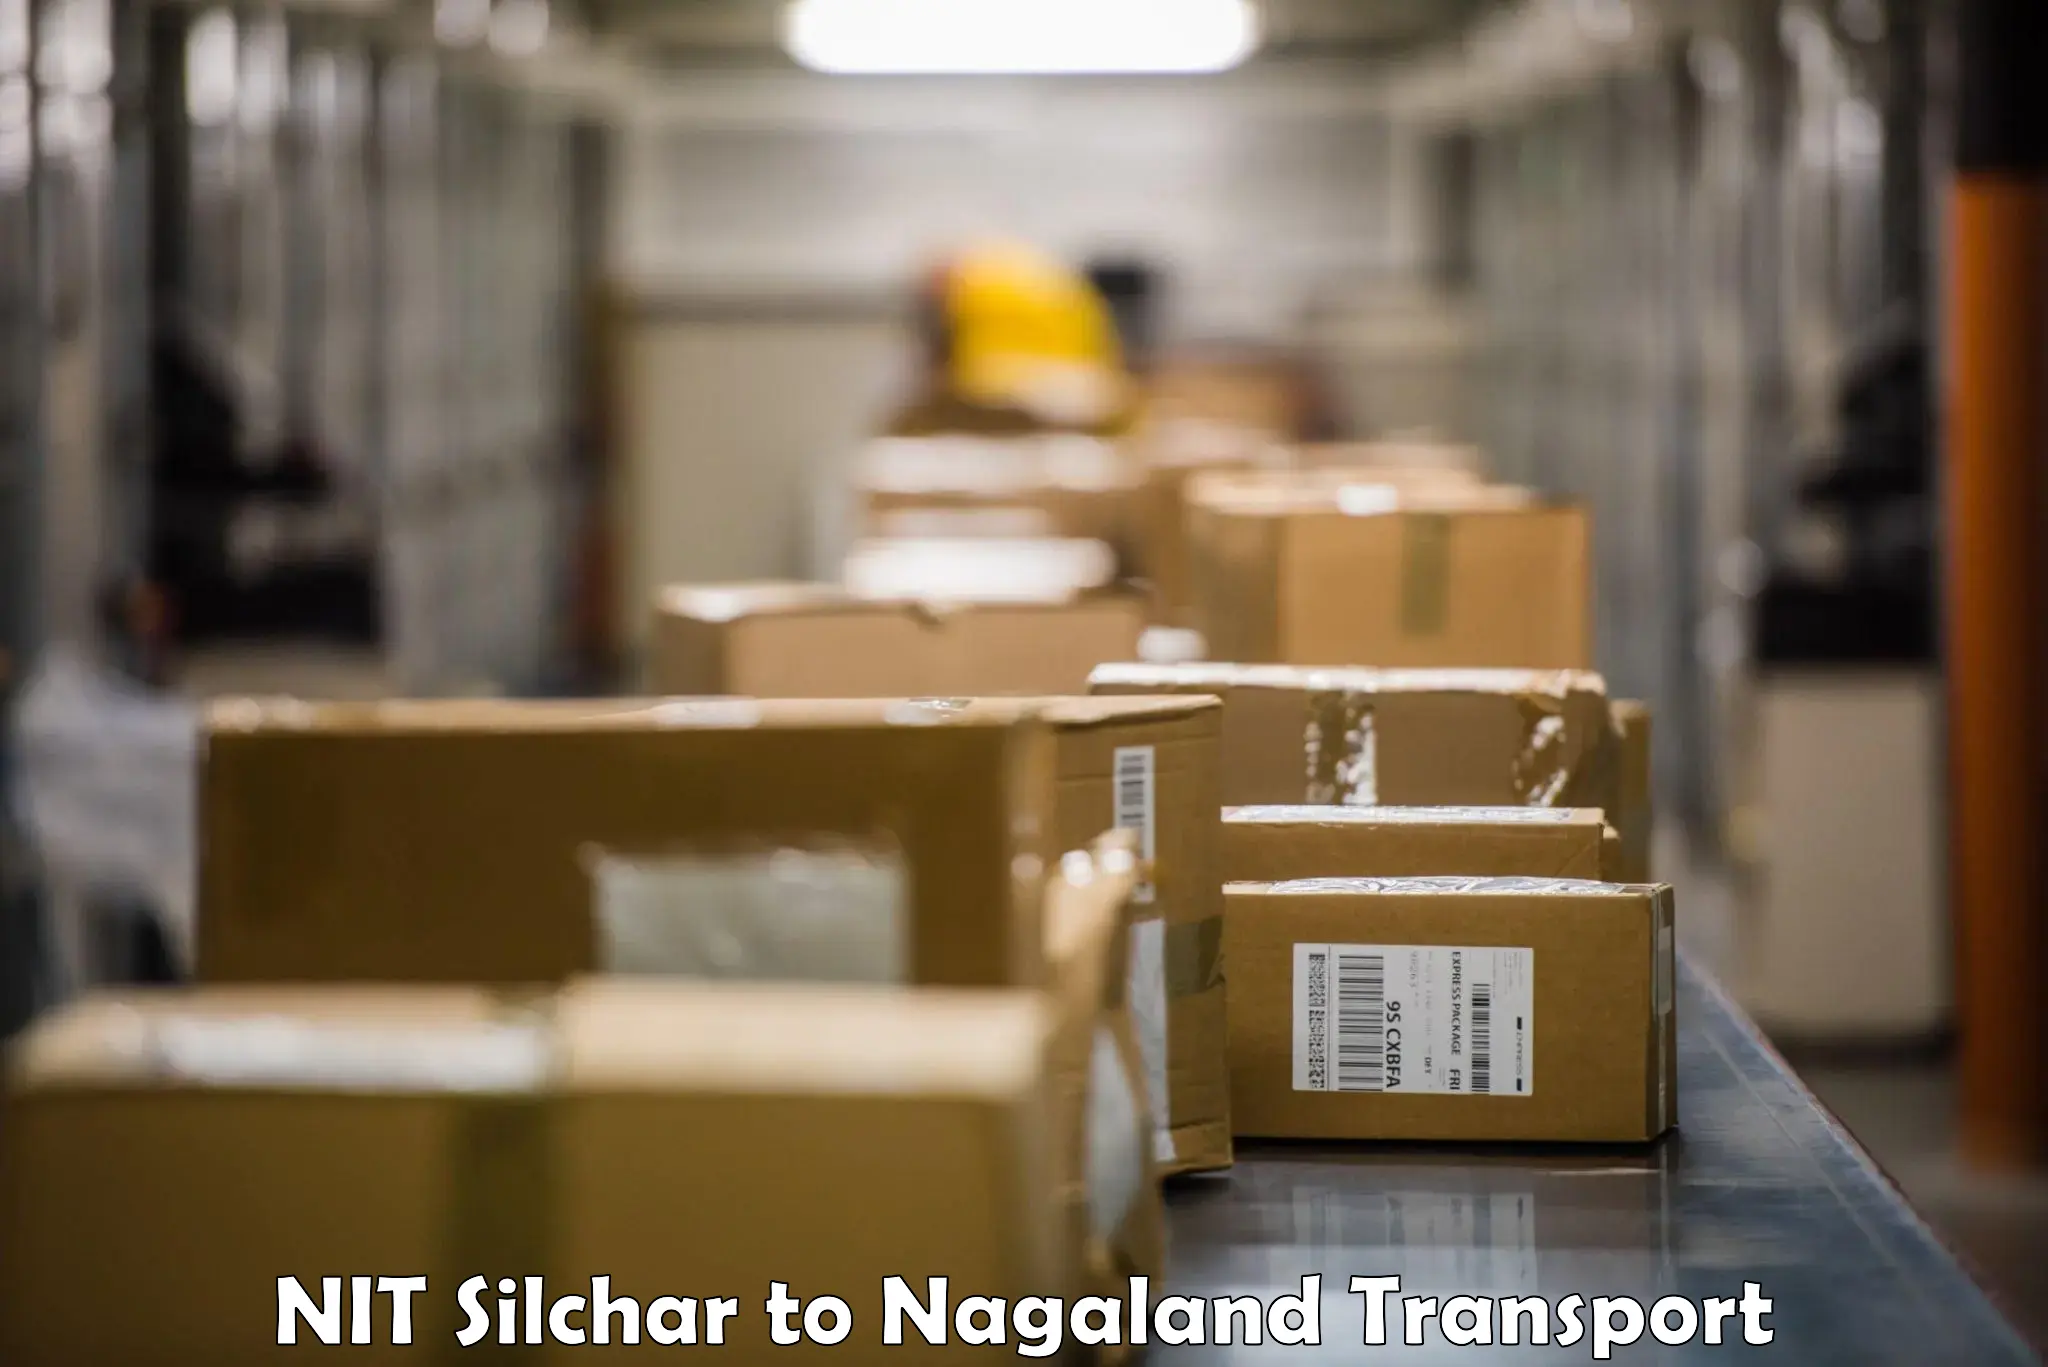 Road transport online services in NIT Silchar to Chumukedima